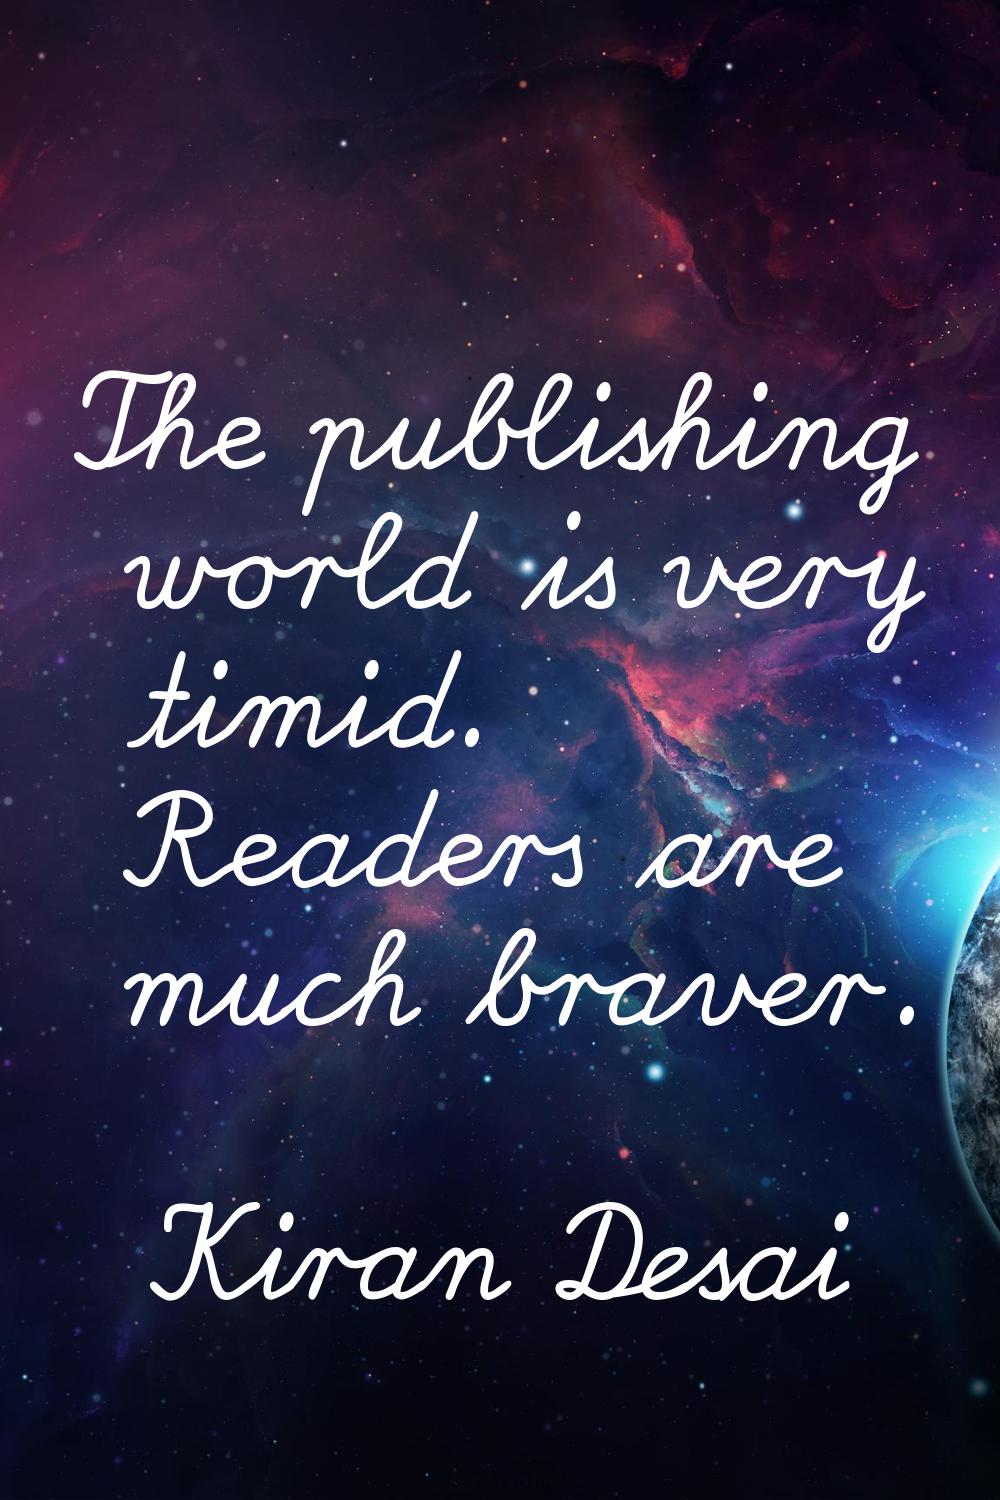 The publishing world is very timid. Readers are much braver.